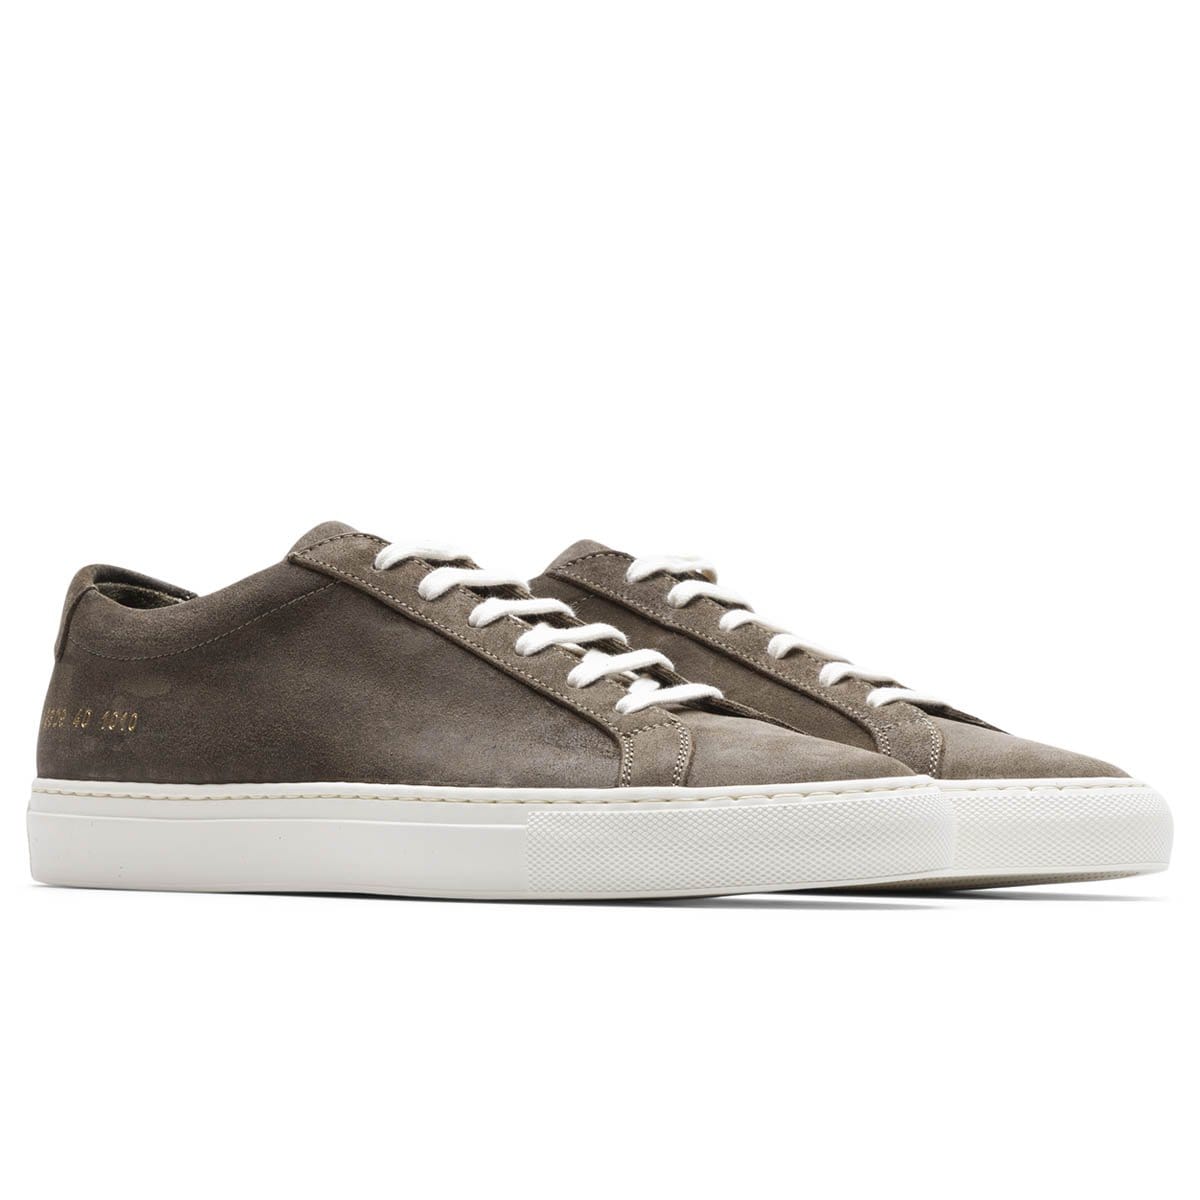 Common Projects ACHILLES LOW WAXED SUEDE